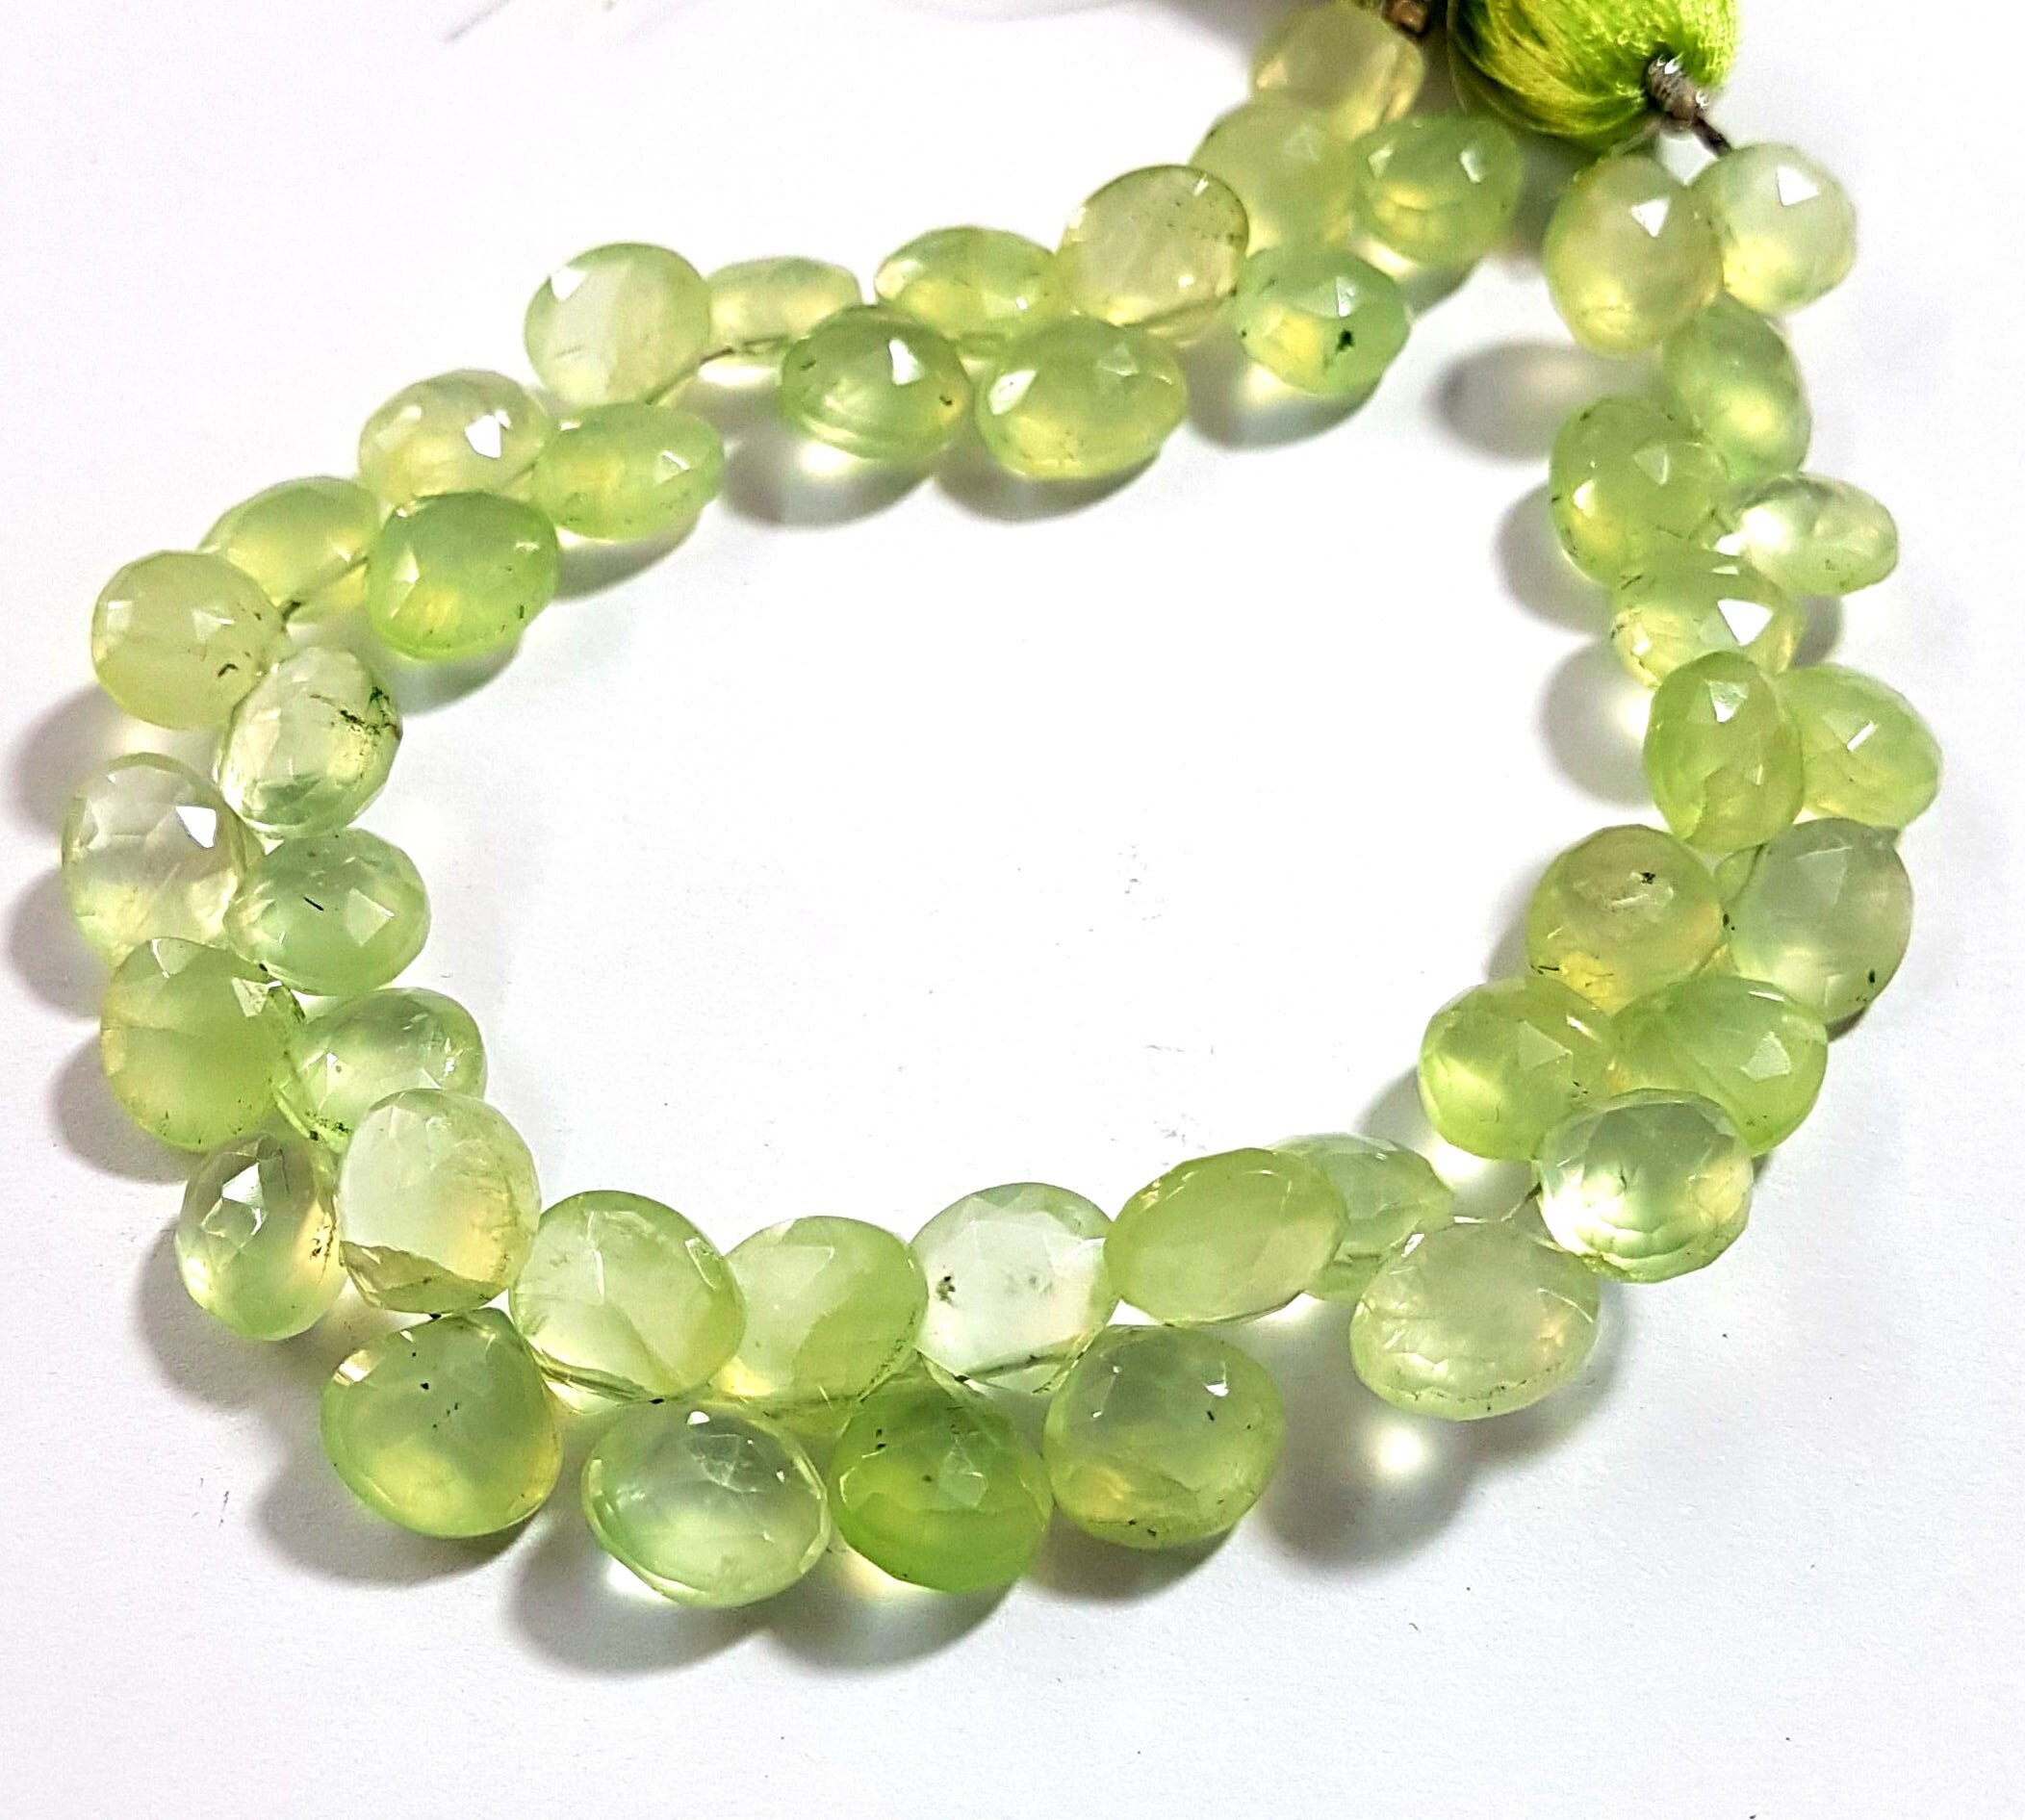 Super Fine Quality Chrome Diopside Smooth 4 to 5MM Heart Shape Briolette Beads9" 